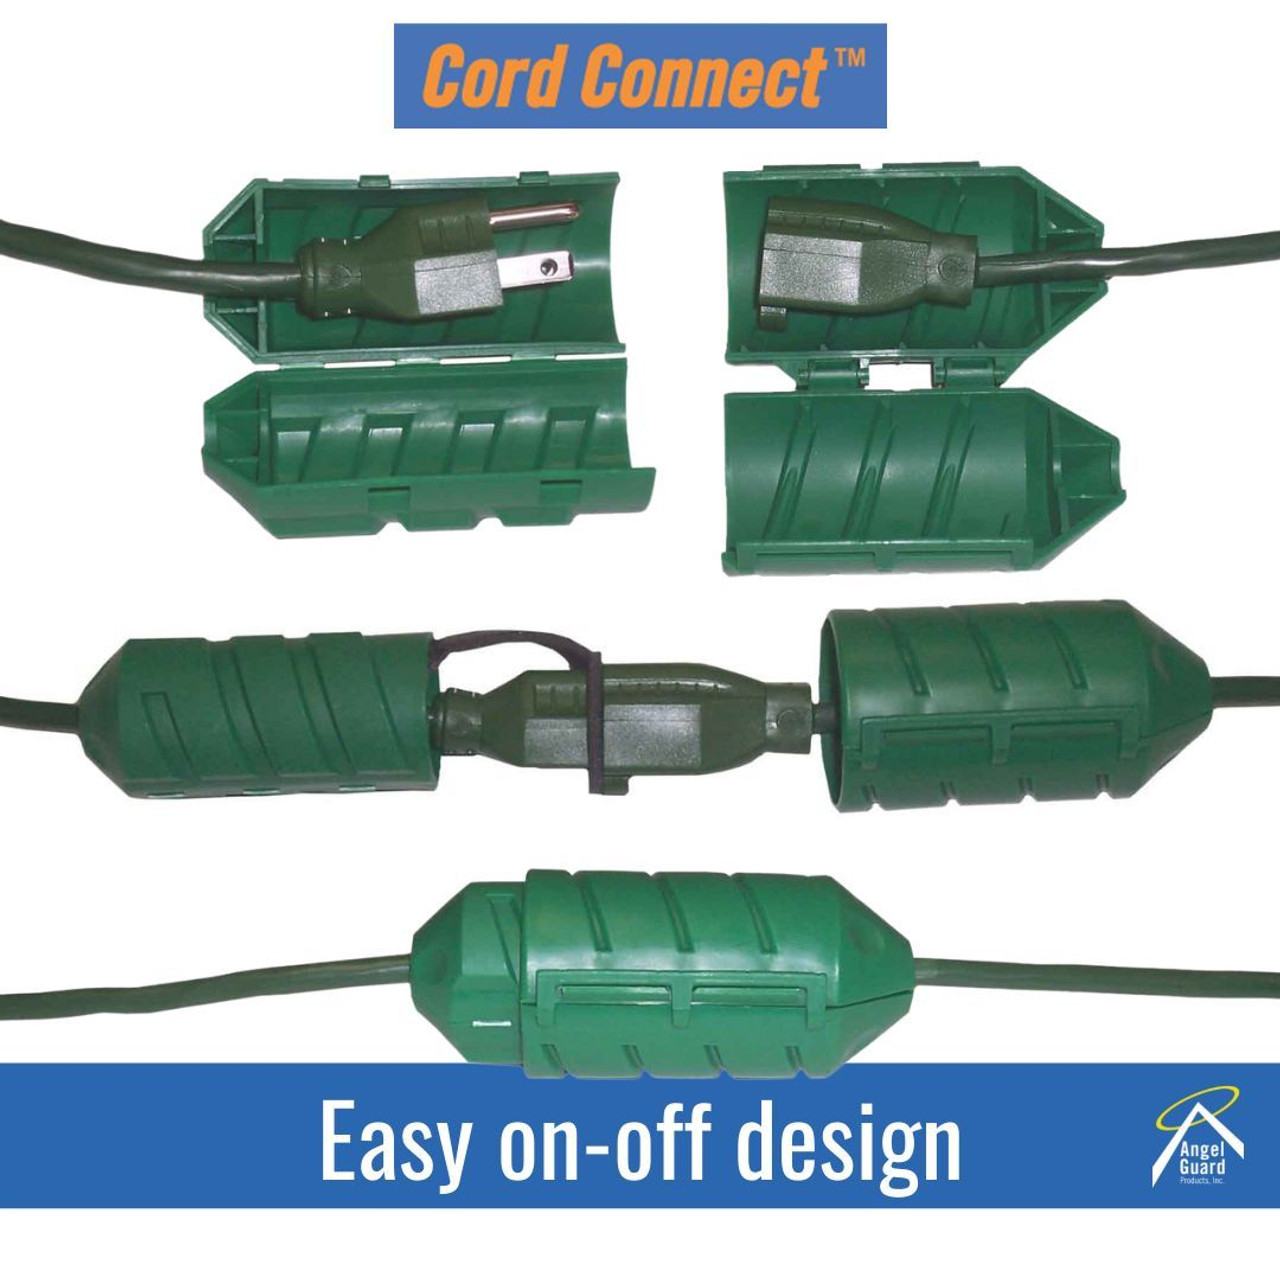 Cord Connect - Angel-Guard Products